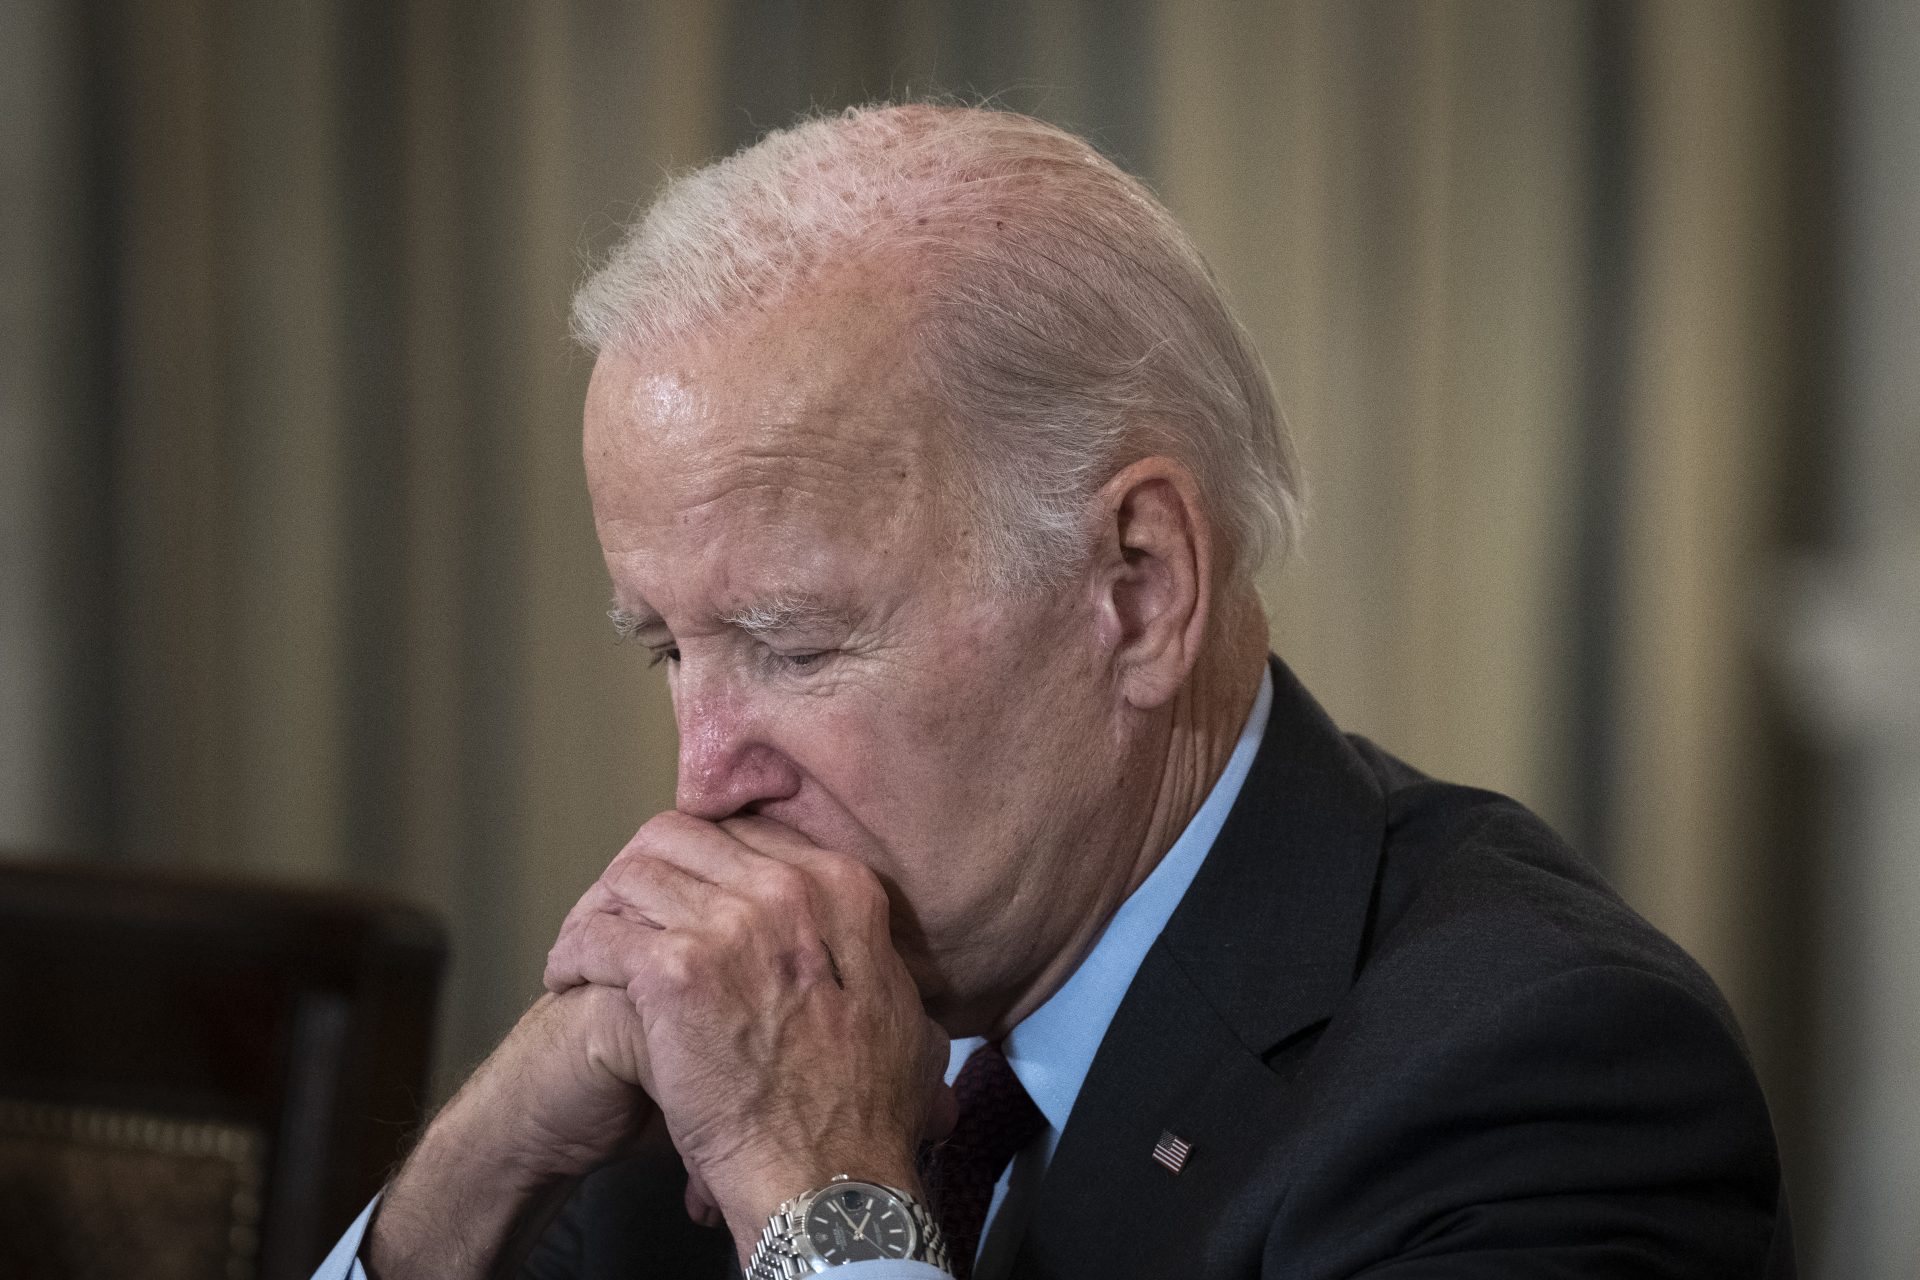 Where does Biden stand on abortion rights in America?